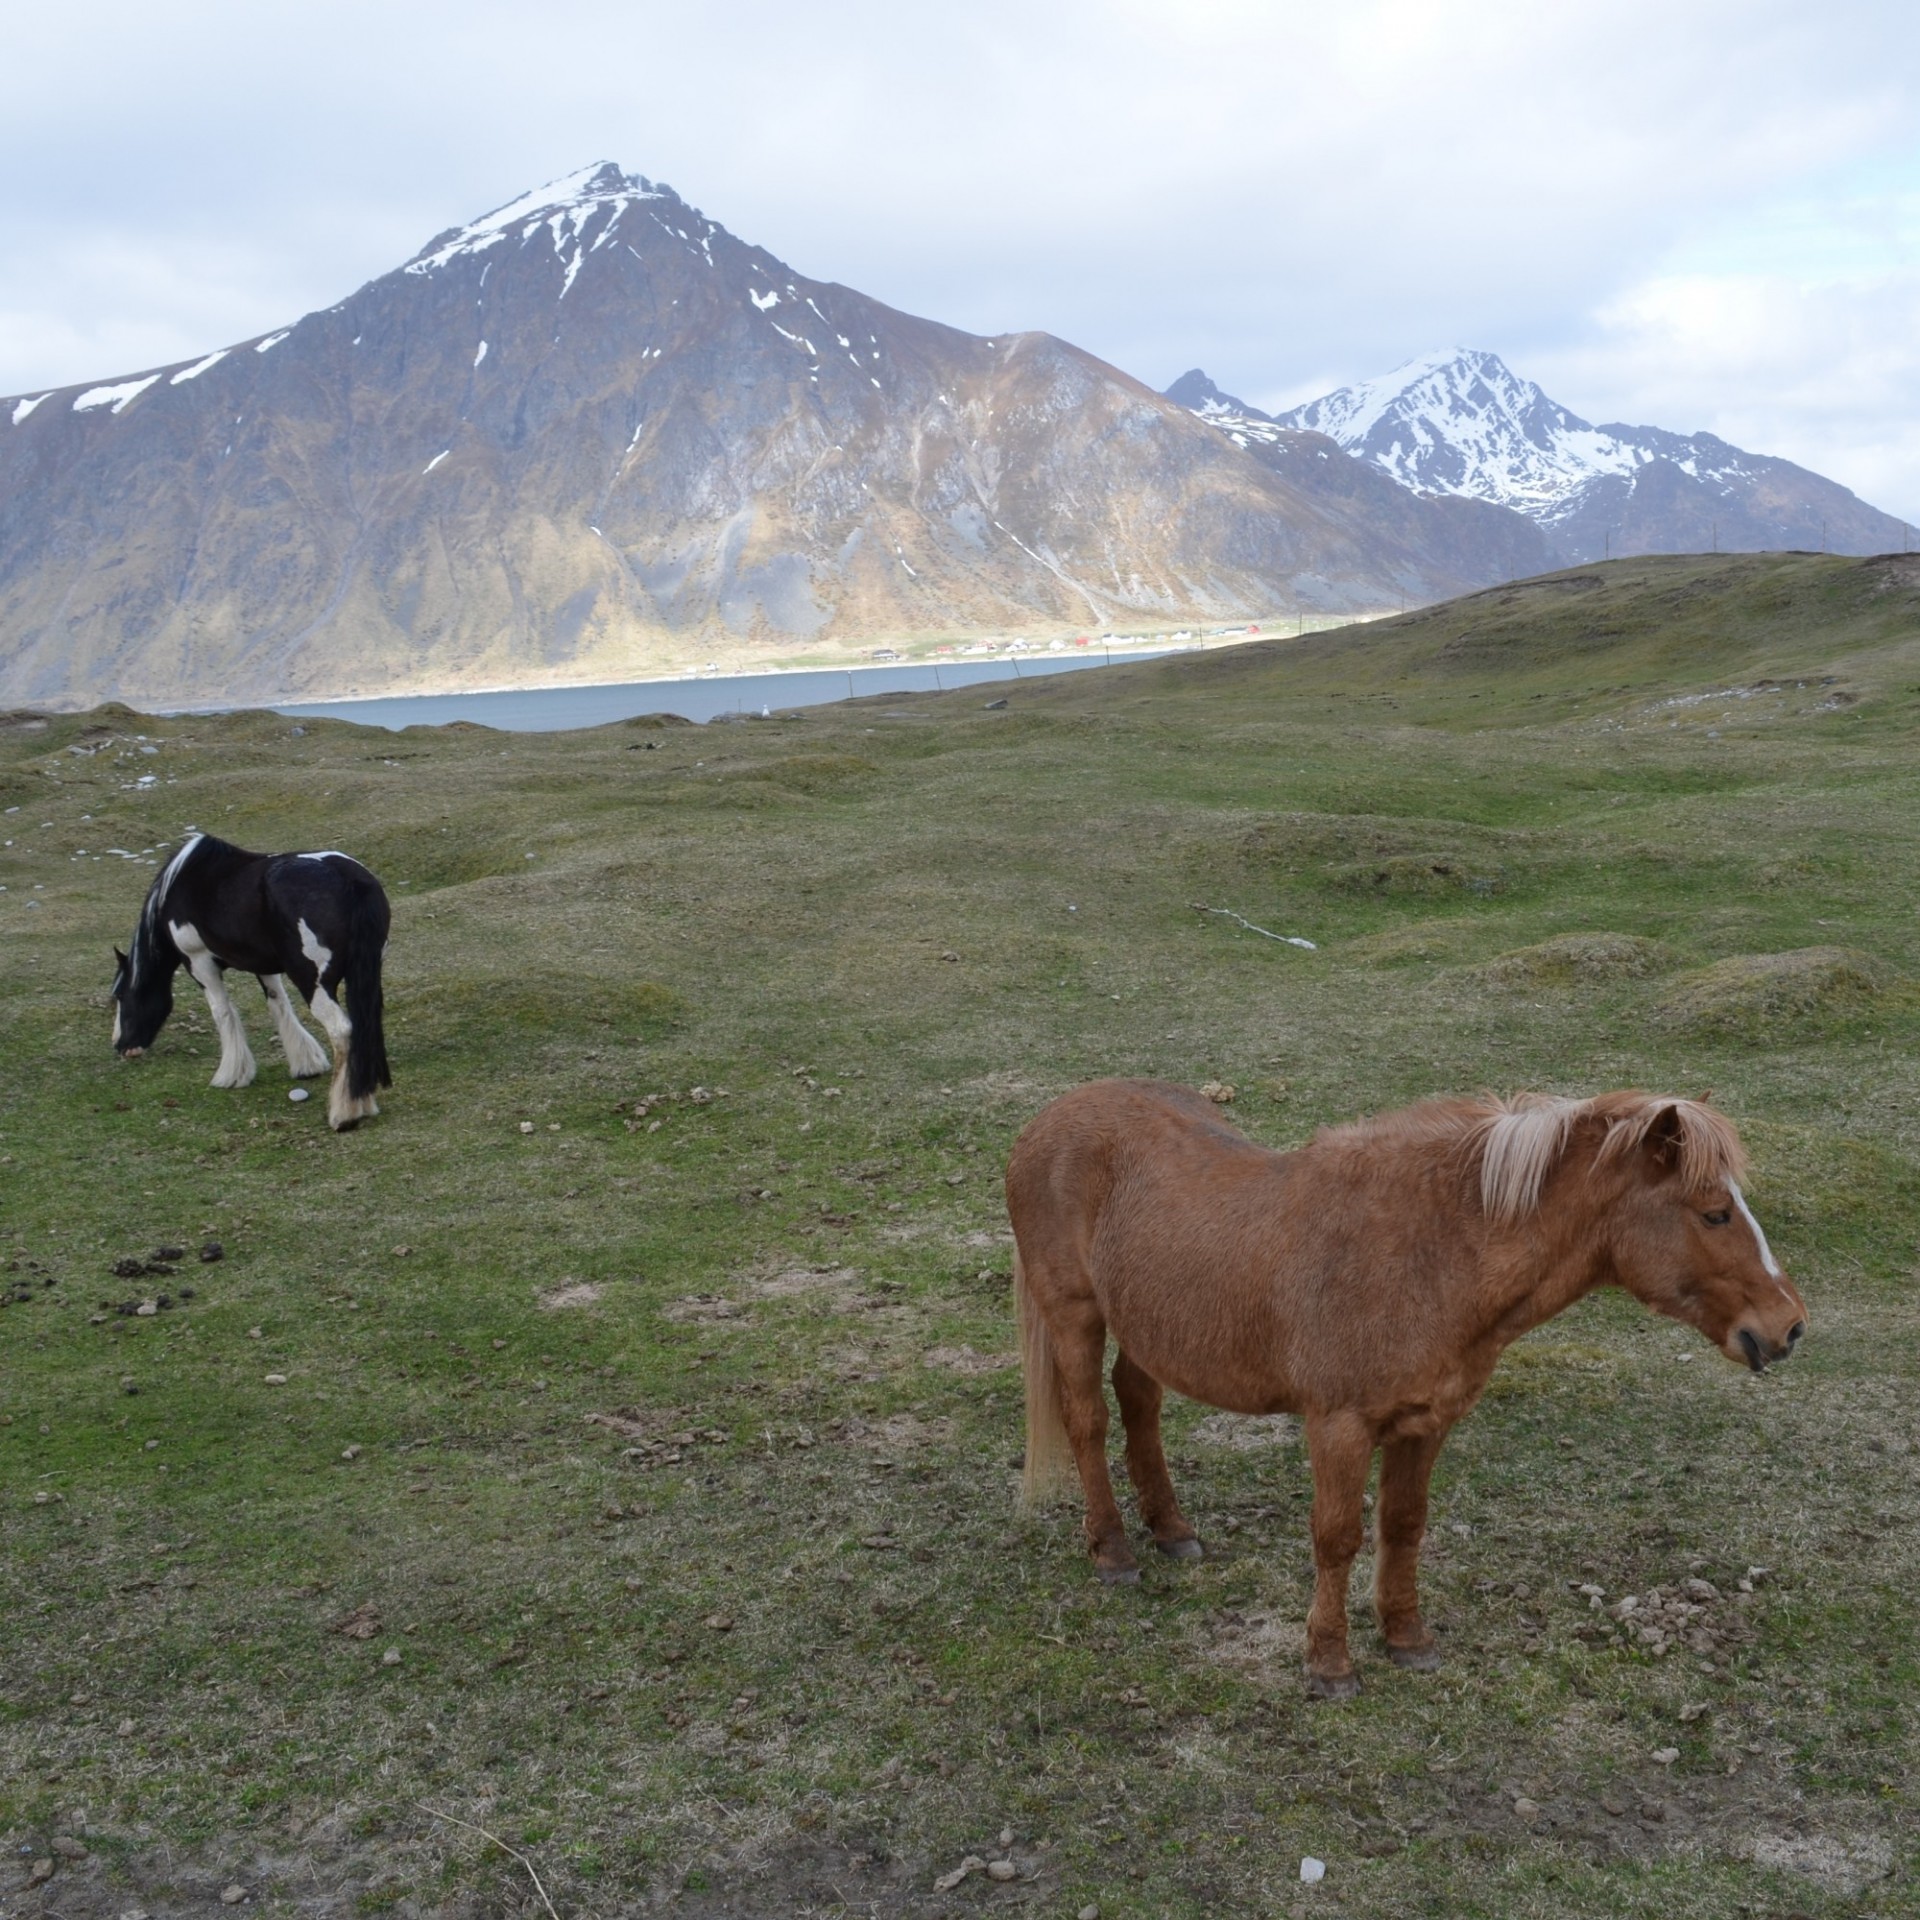 These horses on the island of Flakstadoya, in Norway’s Lofoten archipelago, are from ancient local breeds. Despite the unforgiving landscape, the Lofotens have been inhabited by people and their livestock for thousands of years. Credit: Kevin Krajick